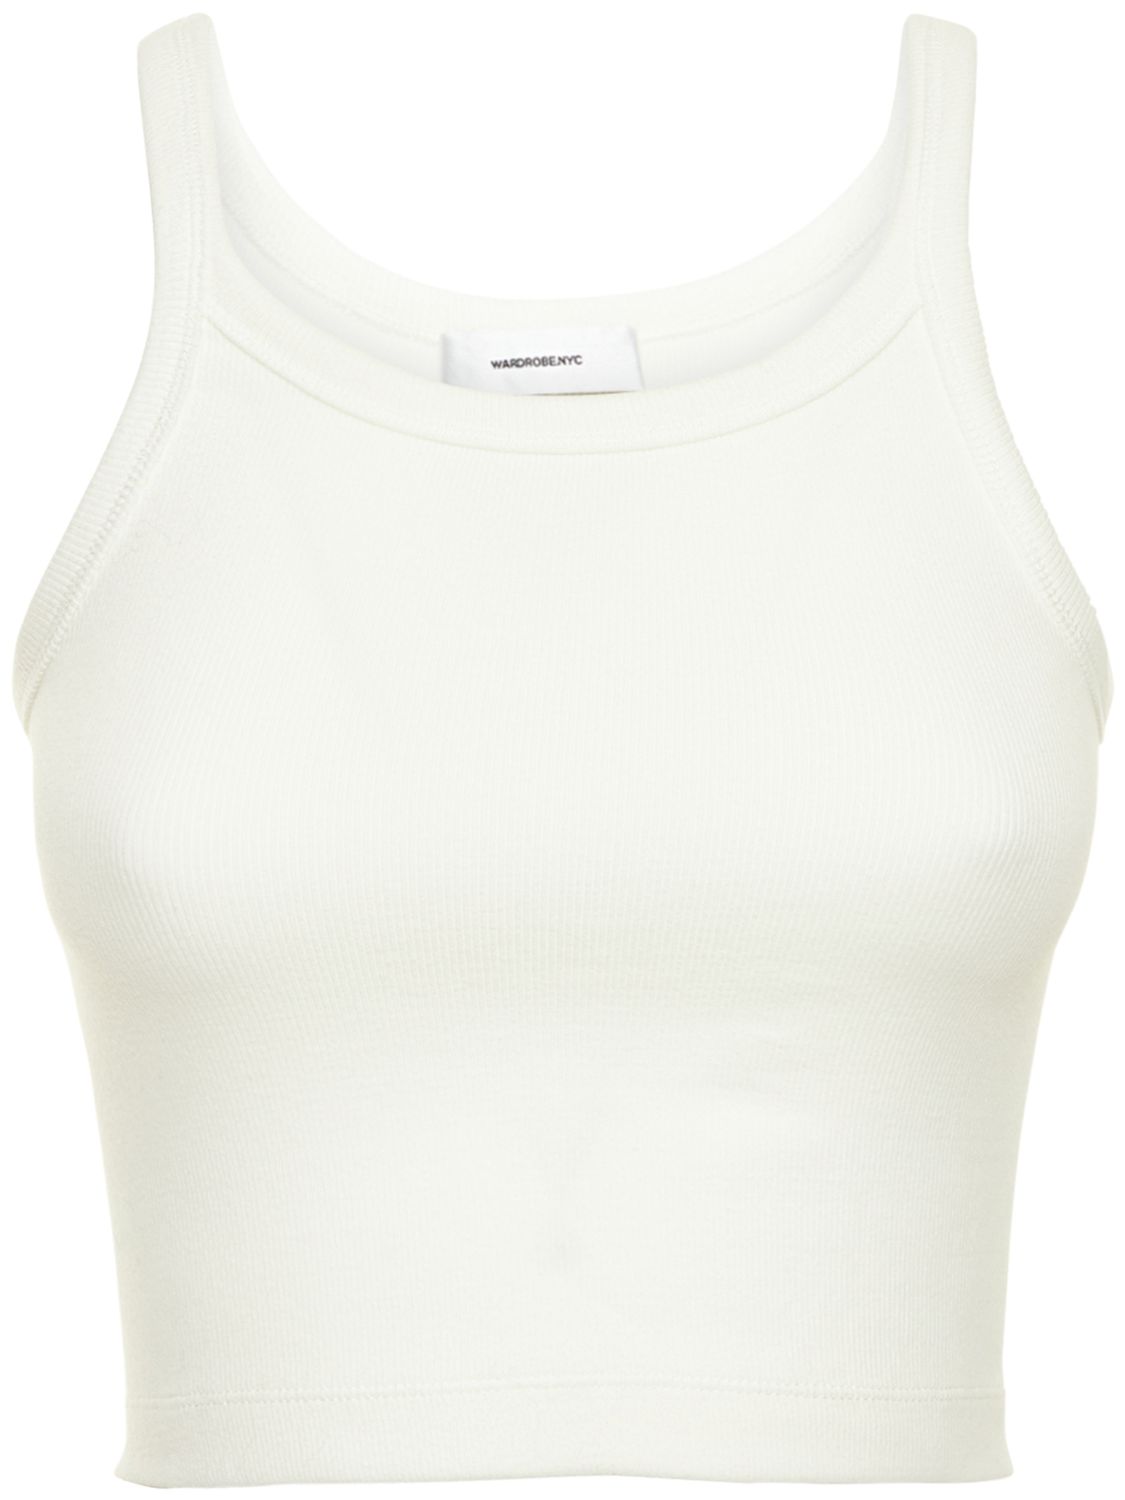 Wardrobe.nyc Hb Ribbed Stretch Cotton Tank Top In White